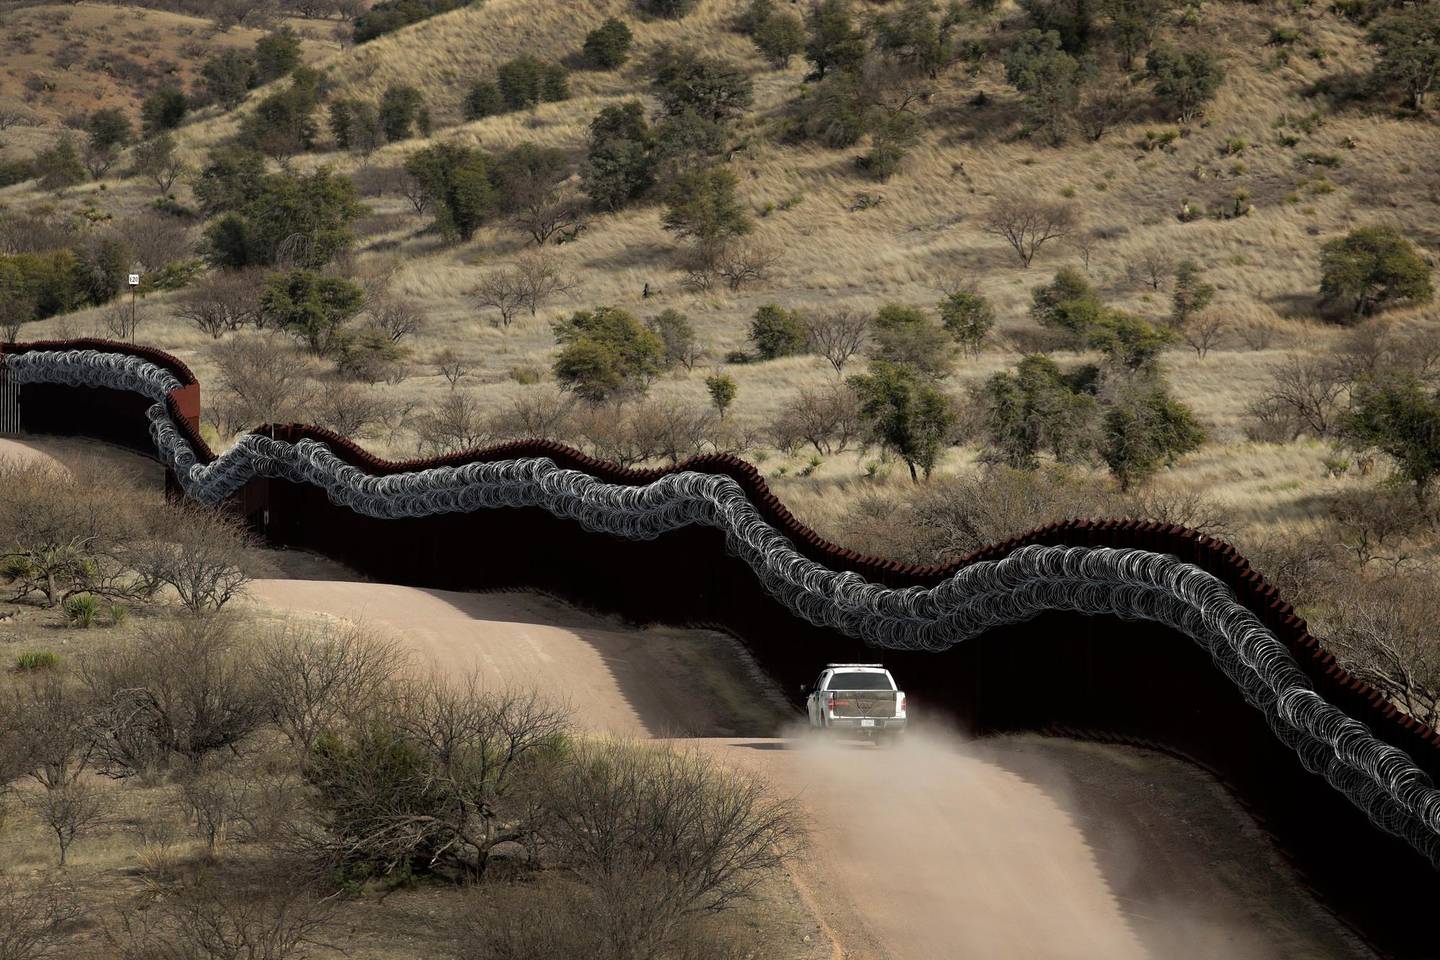 FILE - This March 2, 2019, file photo, shows a Customs and Border Control agent patrolling on the US side of a razor-wire-covered border wall along the Mexico east of Nogales, Ariz. A border activist charged with helping a pair of migrants with water, food and lodging is set to go on trial in U.S. court in Arizona. Defendant Scott Daniel Warren has argued that his spiritual values compel him to help all people in distress. The trial is scheduled to begin Wednesday, May 29, 2019, in Tucson, with the 36-year-old Warren charged with harboring migrants and conspiring to transport and harbor two Mexican men found with him who were in the U.S. illegally. (AP Photo/Charlie Riedel, File)